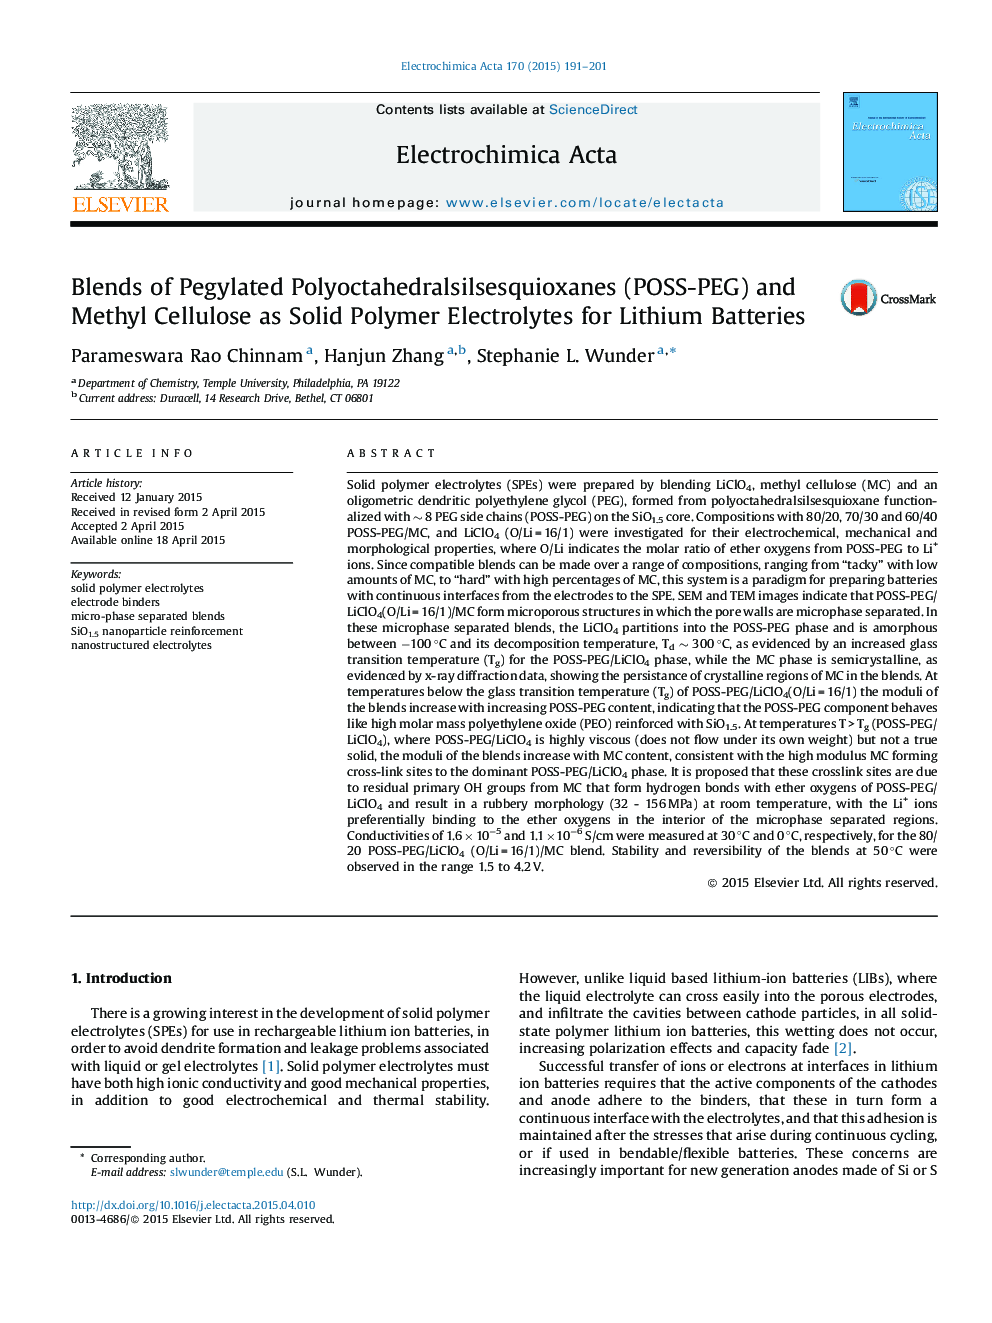 Blends of Pegylated Polyoctahedralsilsesquioxanes (POSS-PEG) and Methyl Cellulose as Solid Polymer Electrolytes for Lithium Batteries